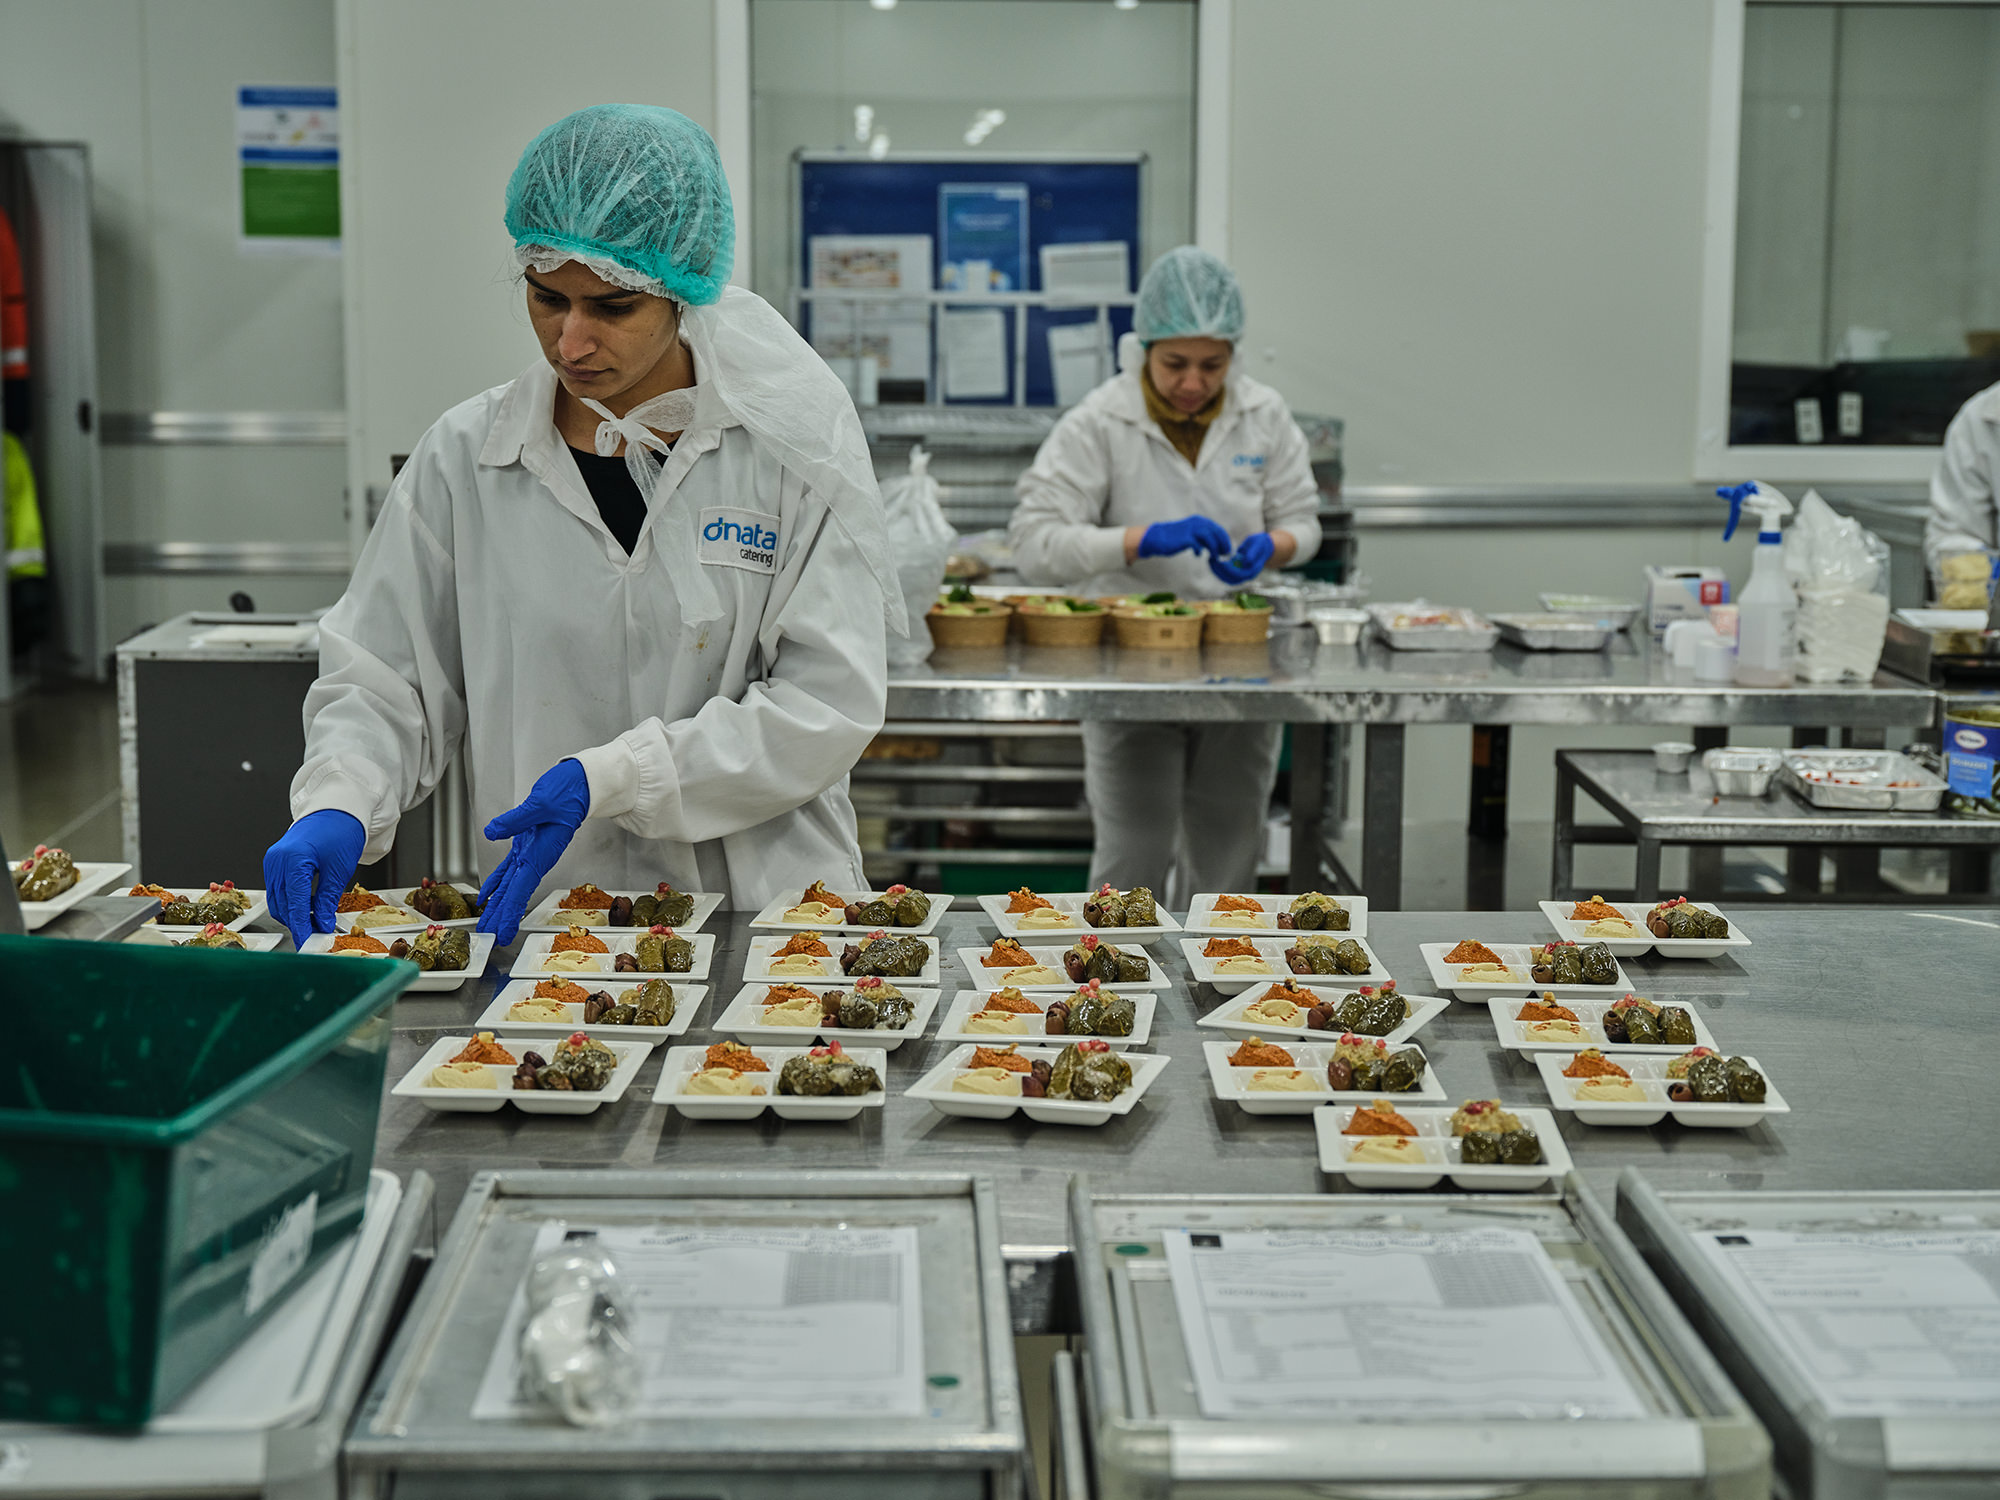 Inflight meals being prepared at dnata catering Melbourne.